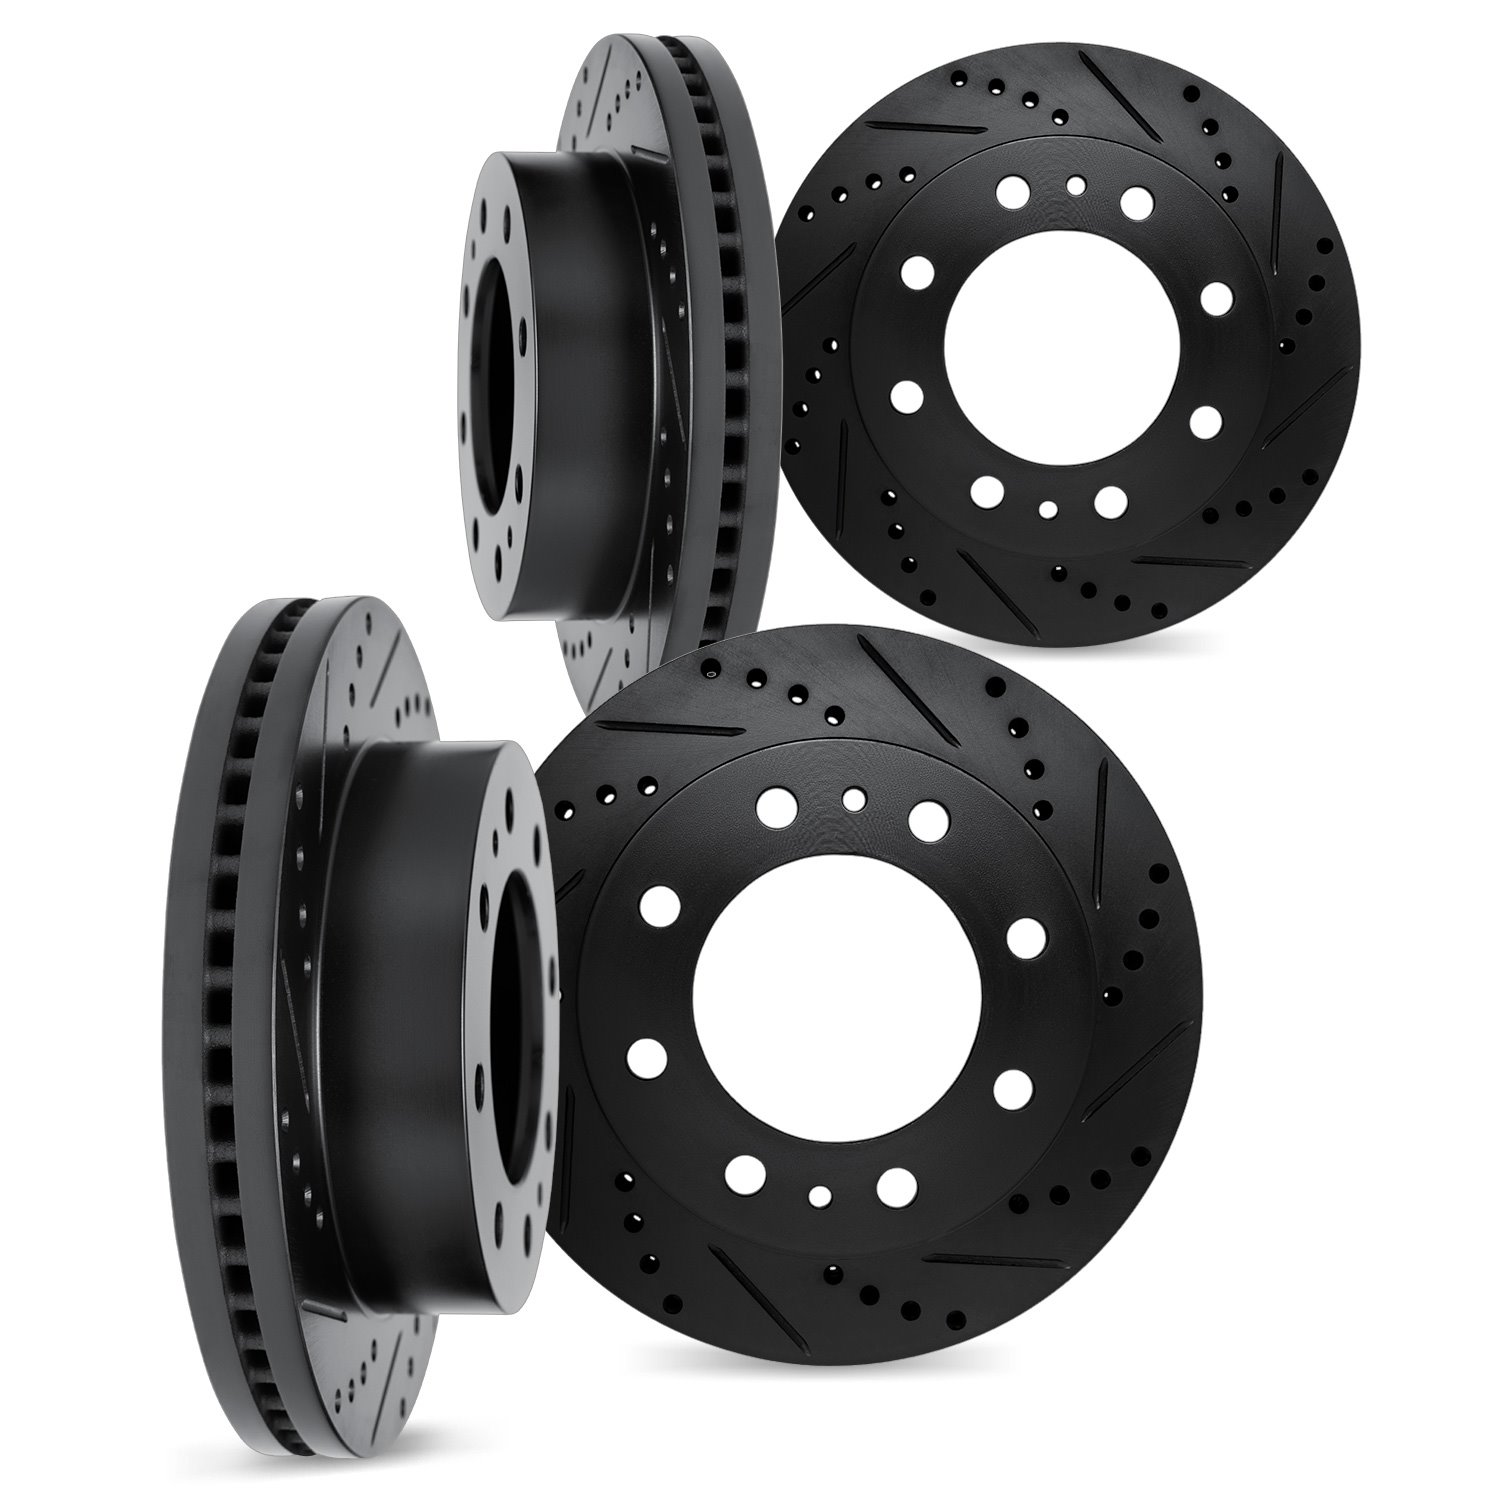 8004-54199 Drilled/Slotted Brake Rotors [Black], Fits Select Ford/Lincoln/Mercury/Mazda, Position: Front and Rear